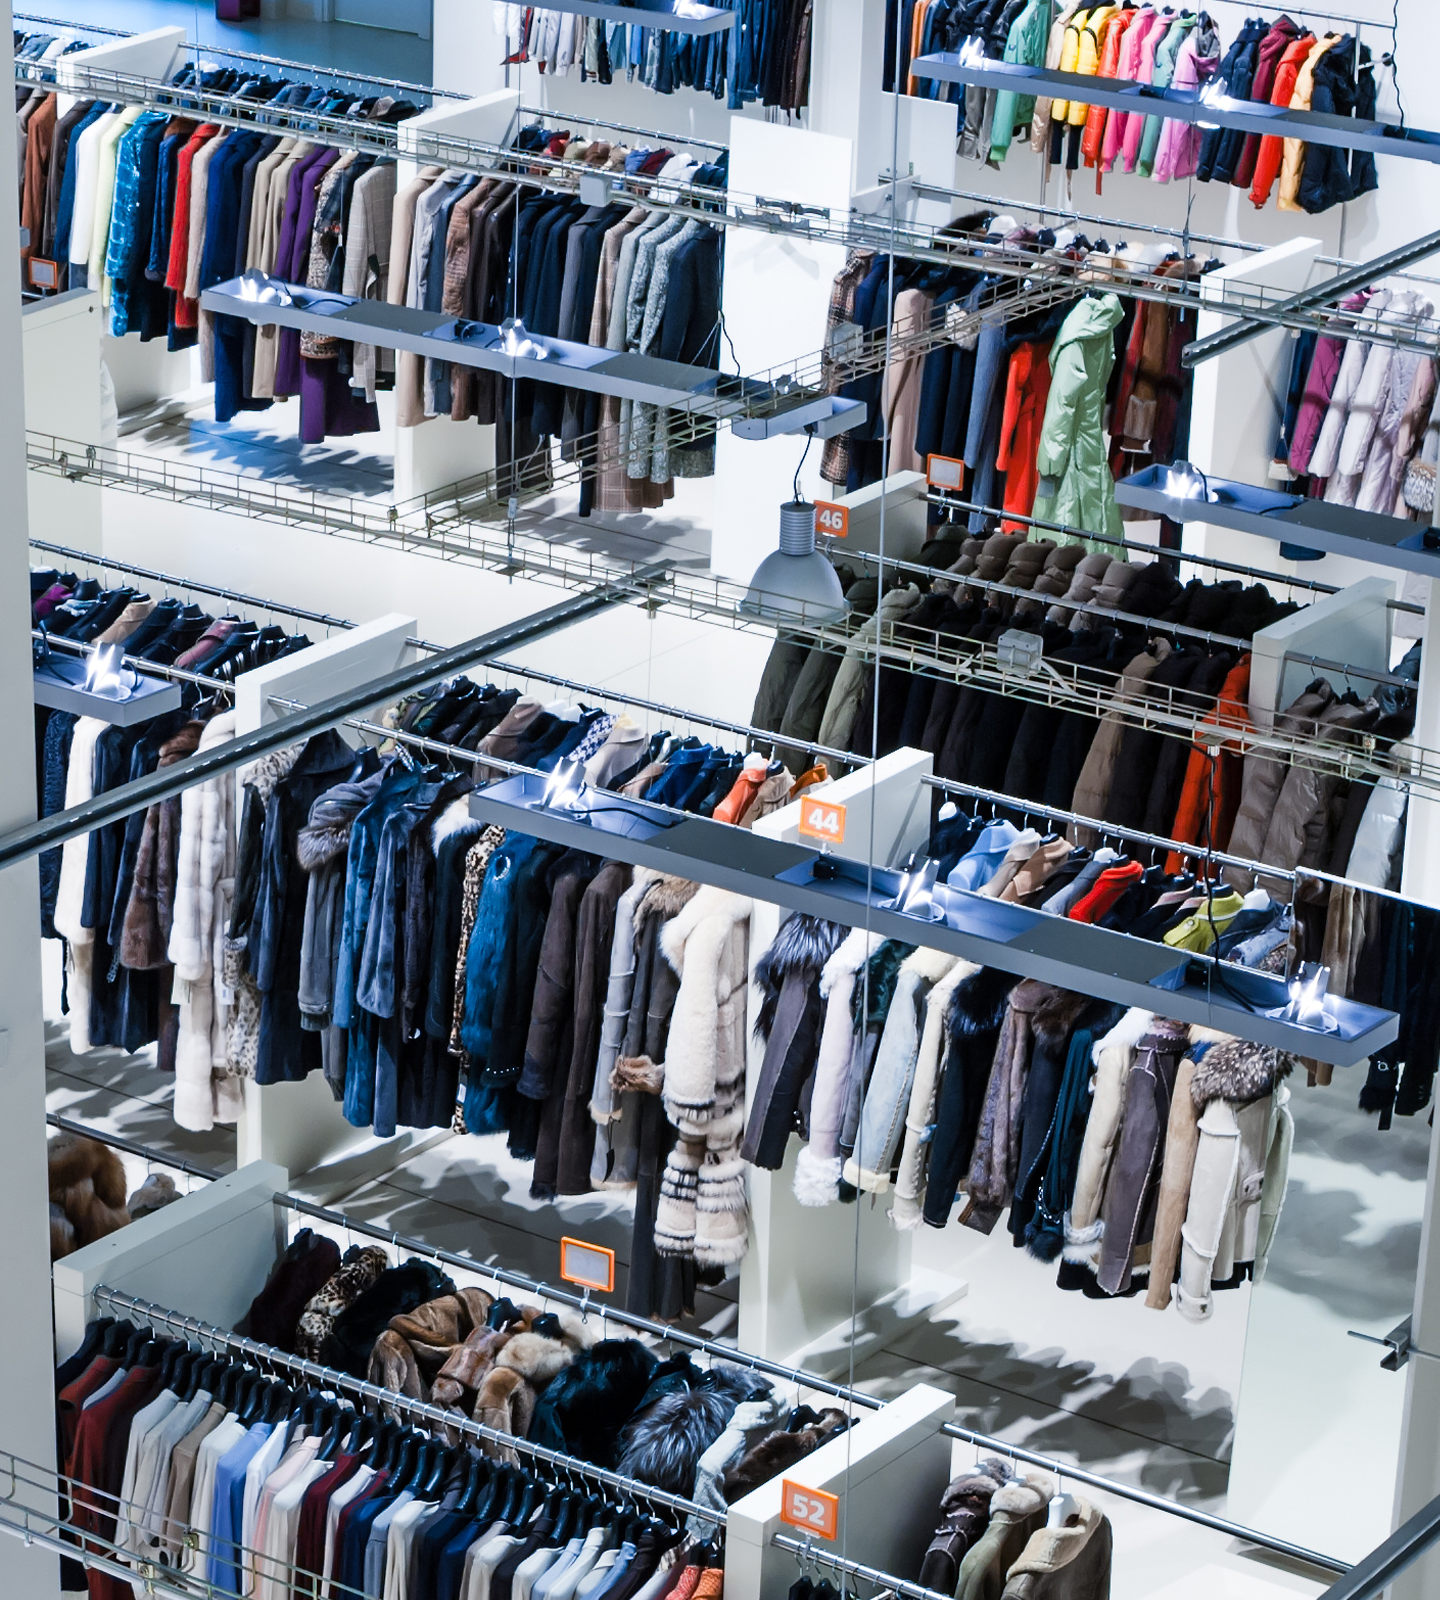 A retail store full of clothing racks displaying a diverse range of apparel.